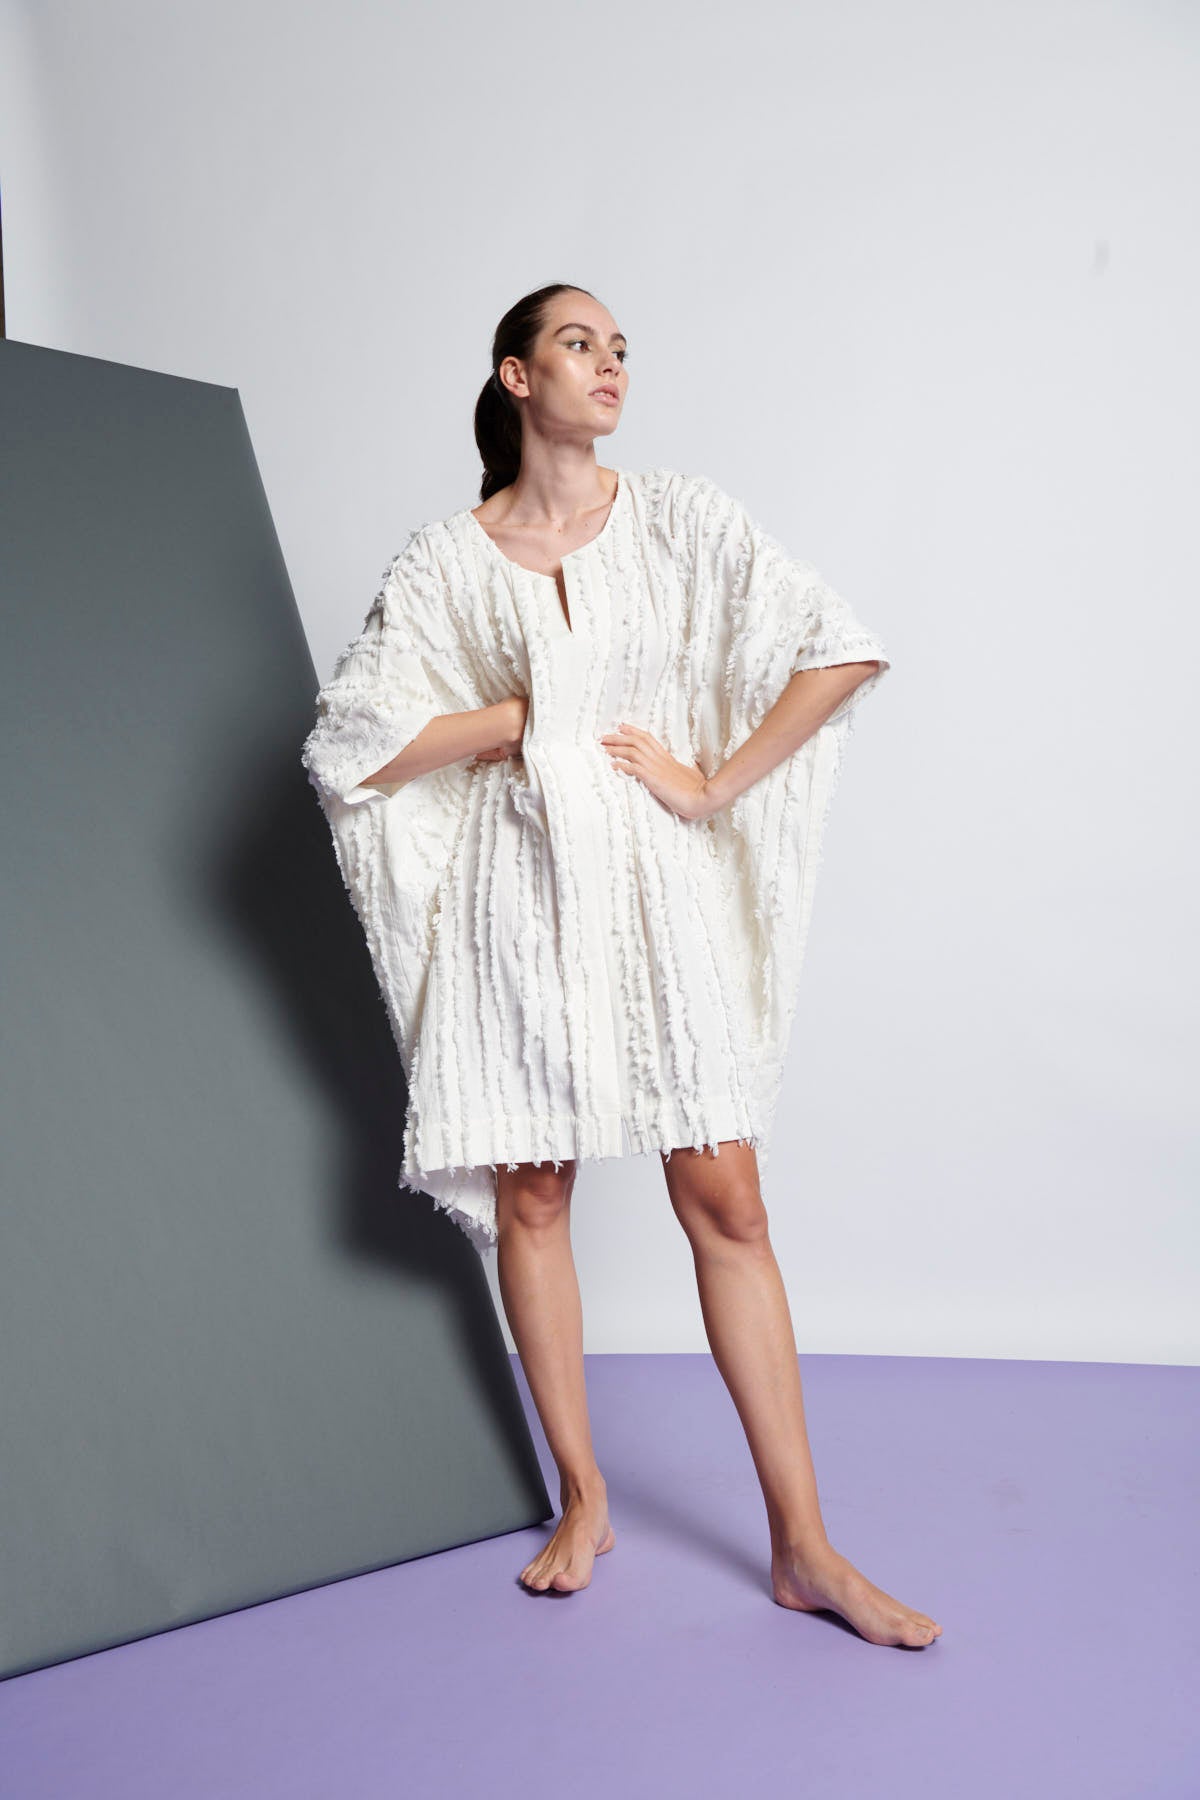 A white easy fit, square cut, knee-length dress made from cotton and linen with round neckline, short sleeves, and striped fringe fabric 